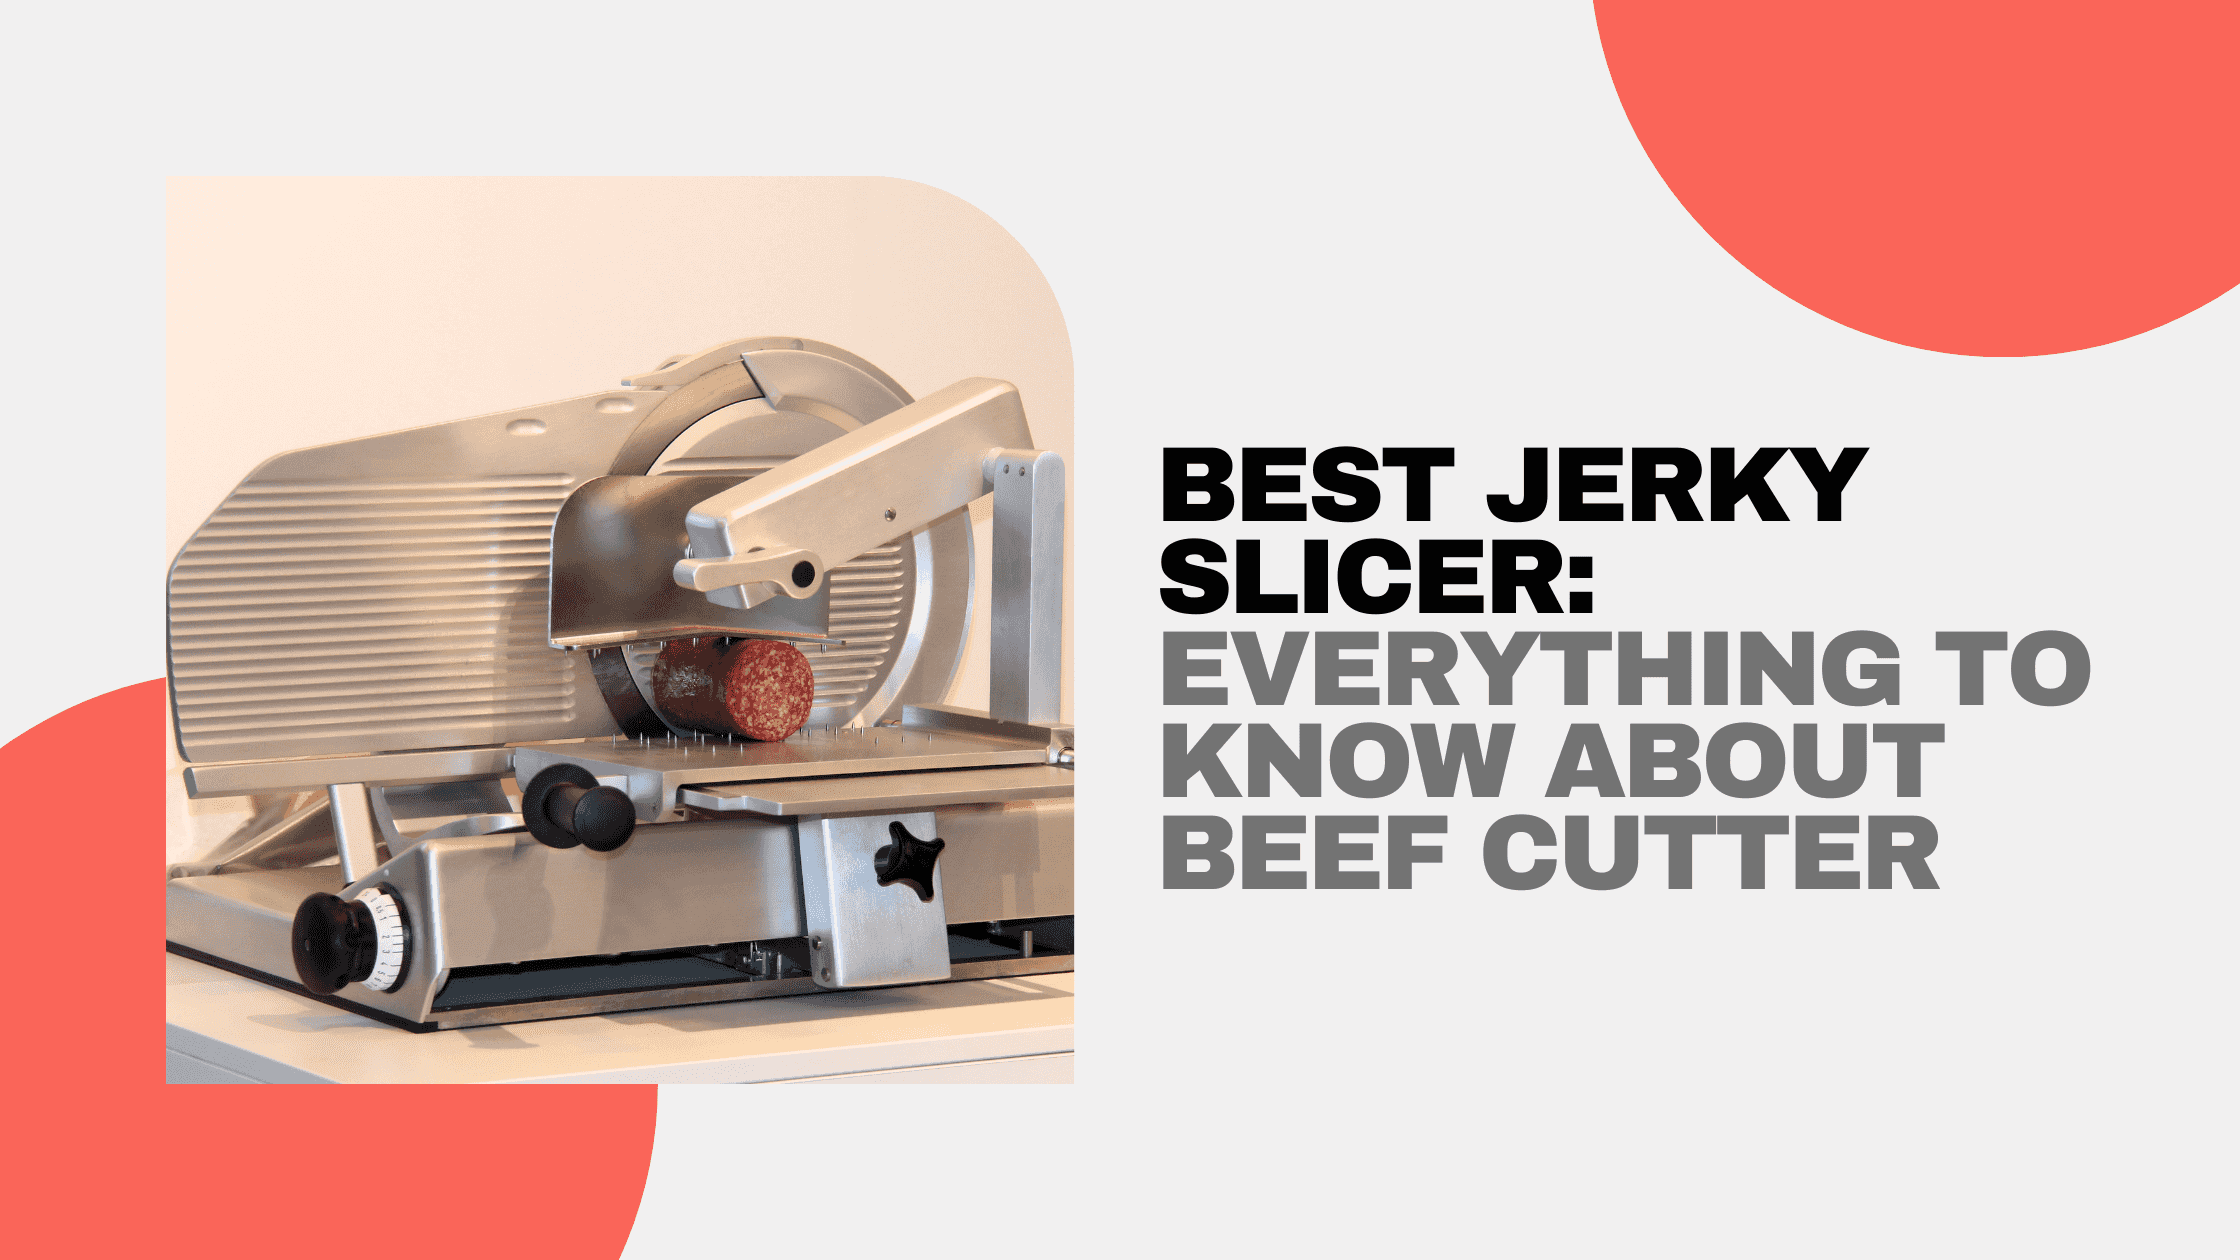 Weston Manual Support Beef Jerky Slicer, Quick and Easy Operation For Cuts  Up To 5” Wide x 1.25” Thick, Durable Aluminum Construction, Stainless Steel